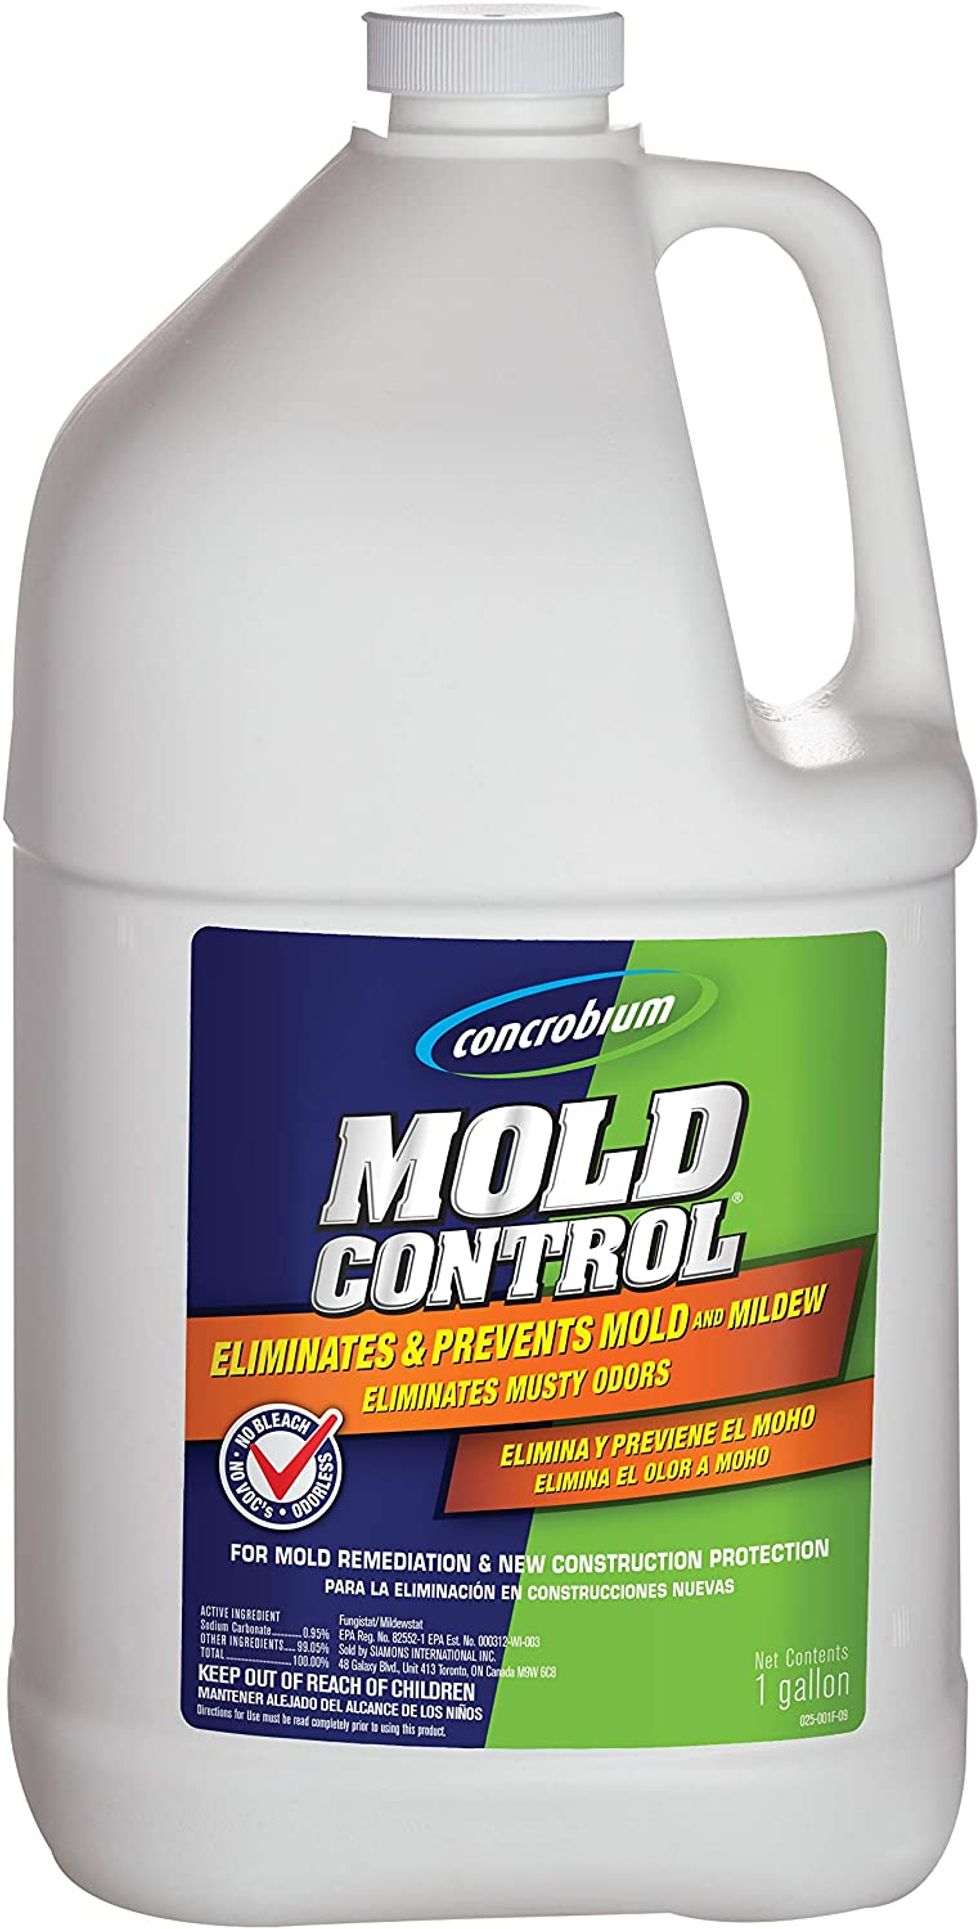 The 10 Best Mold And Mildew Removers 2020 22 Words 1681